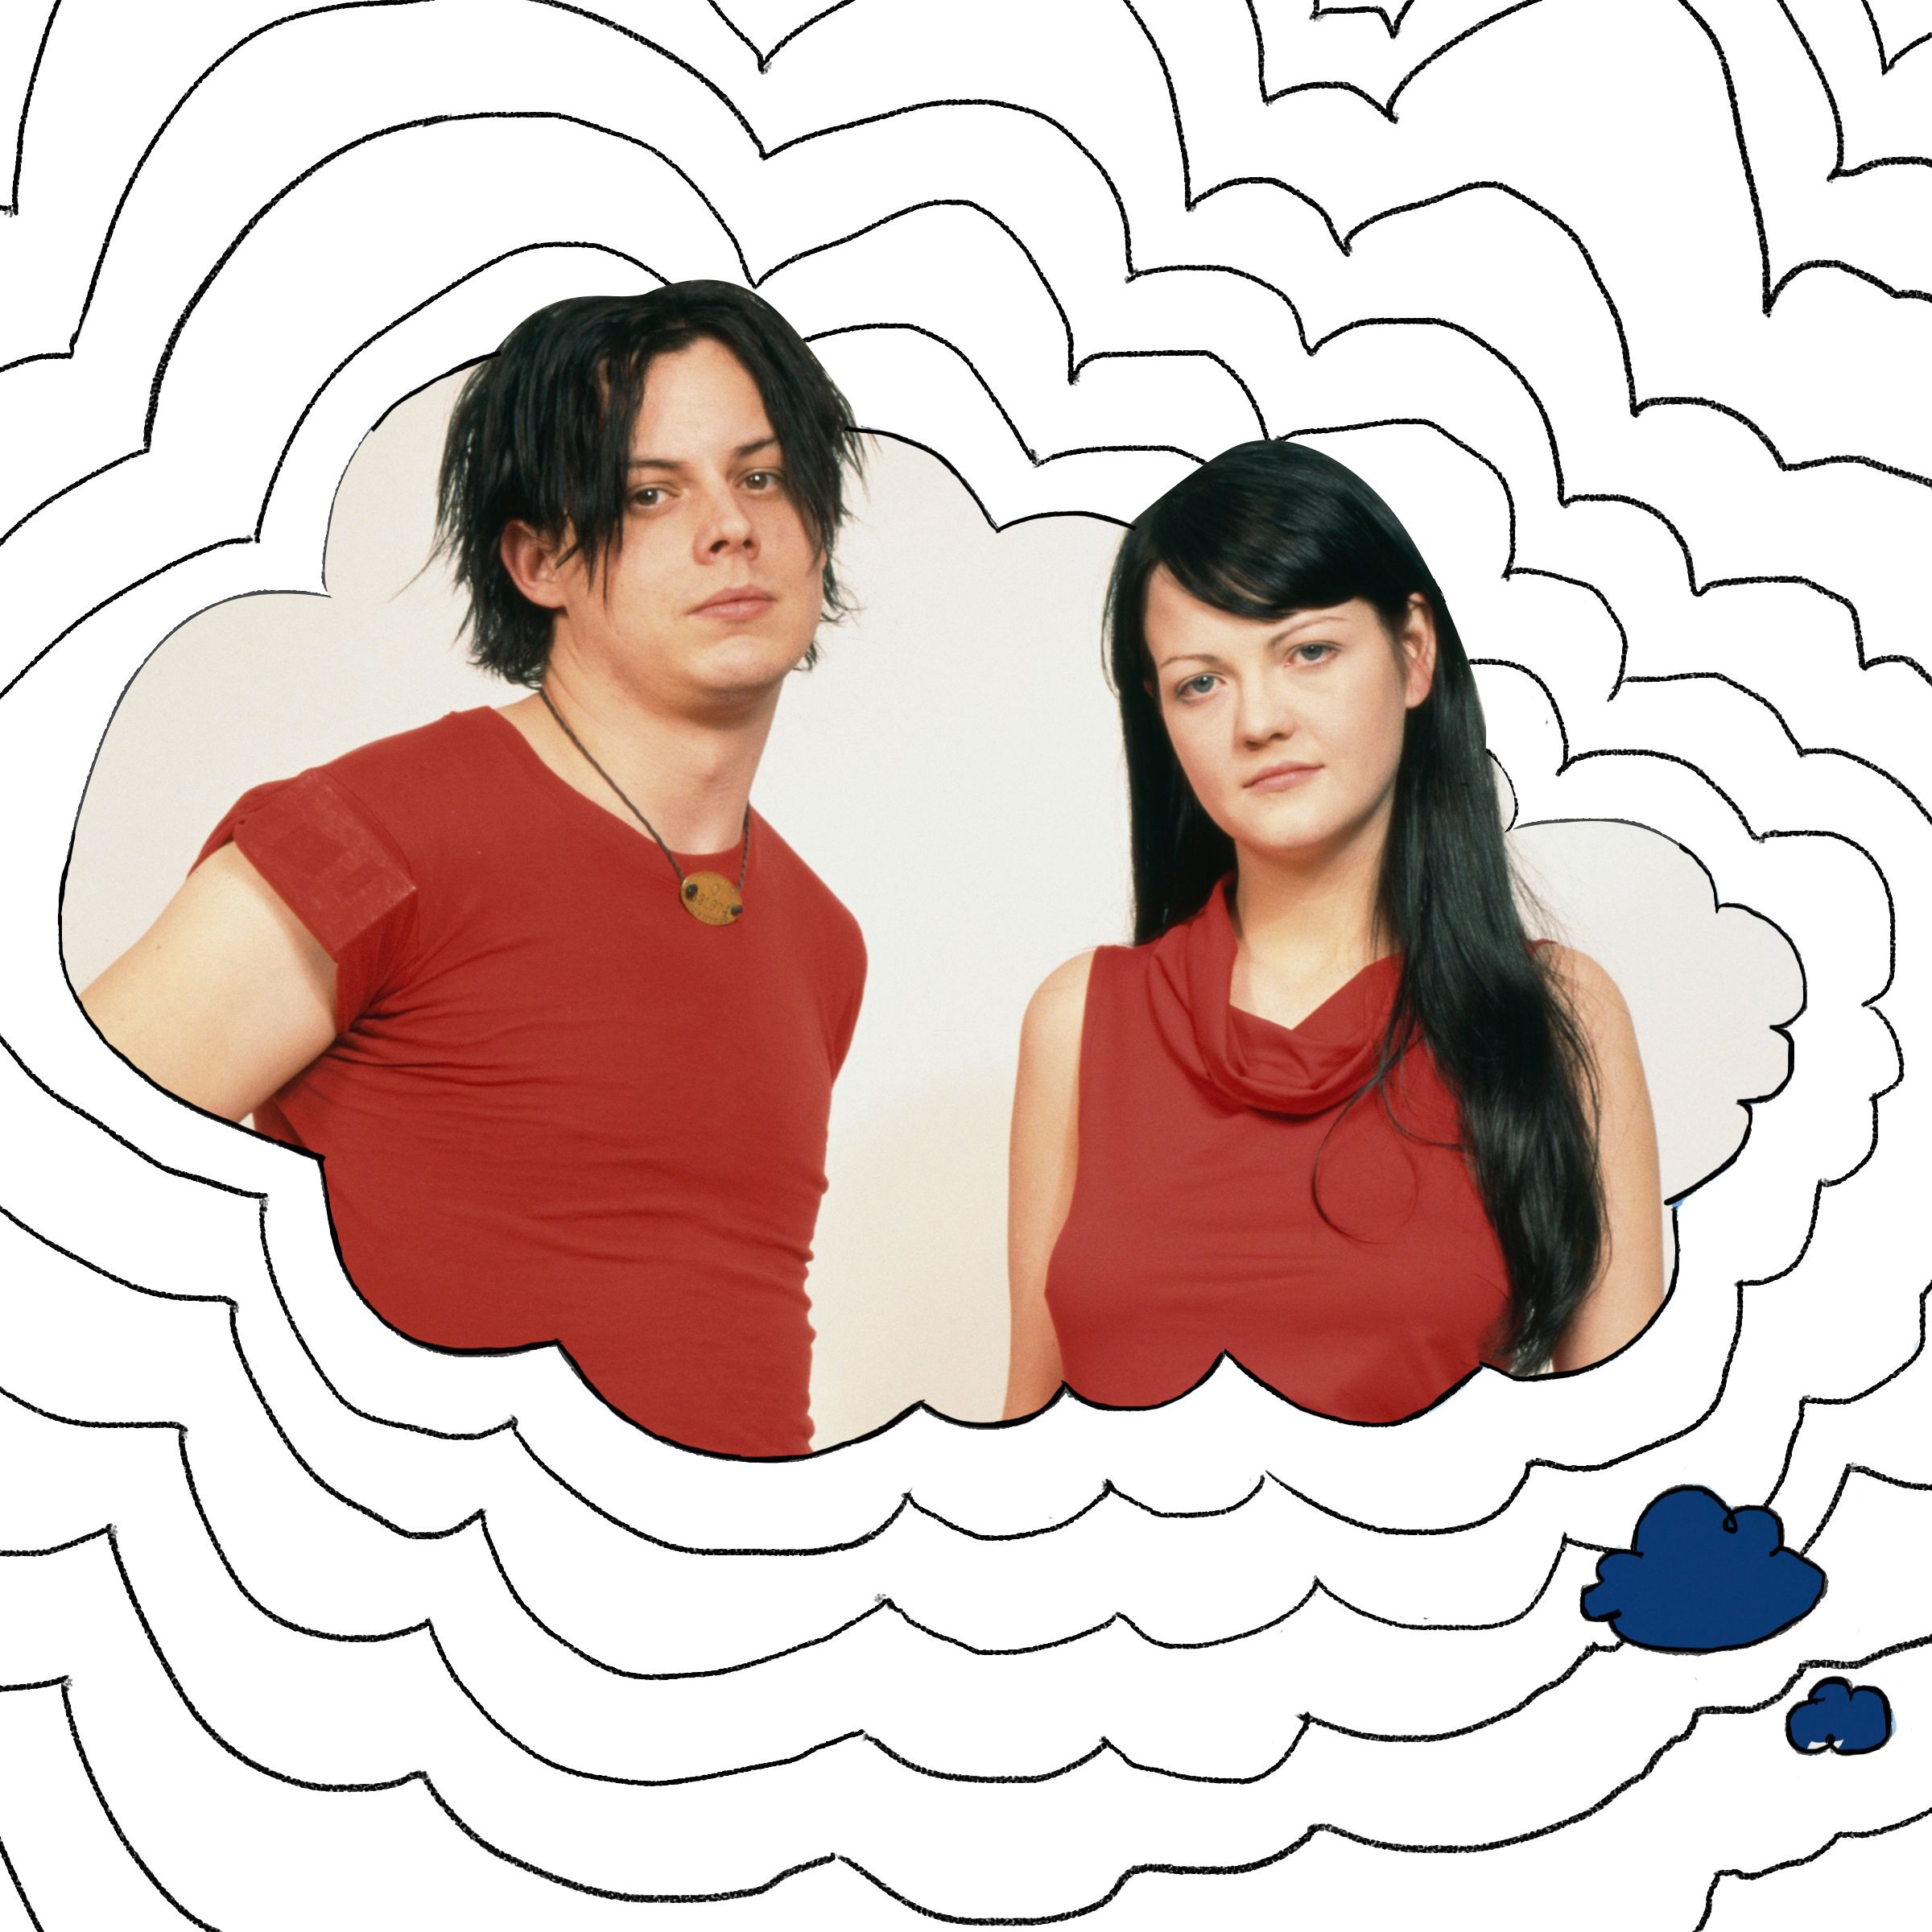 I Think About the White Stripes Secret Marriage a